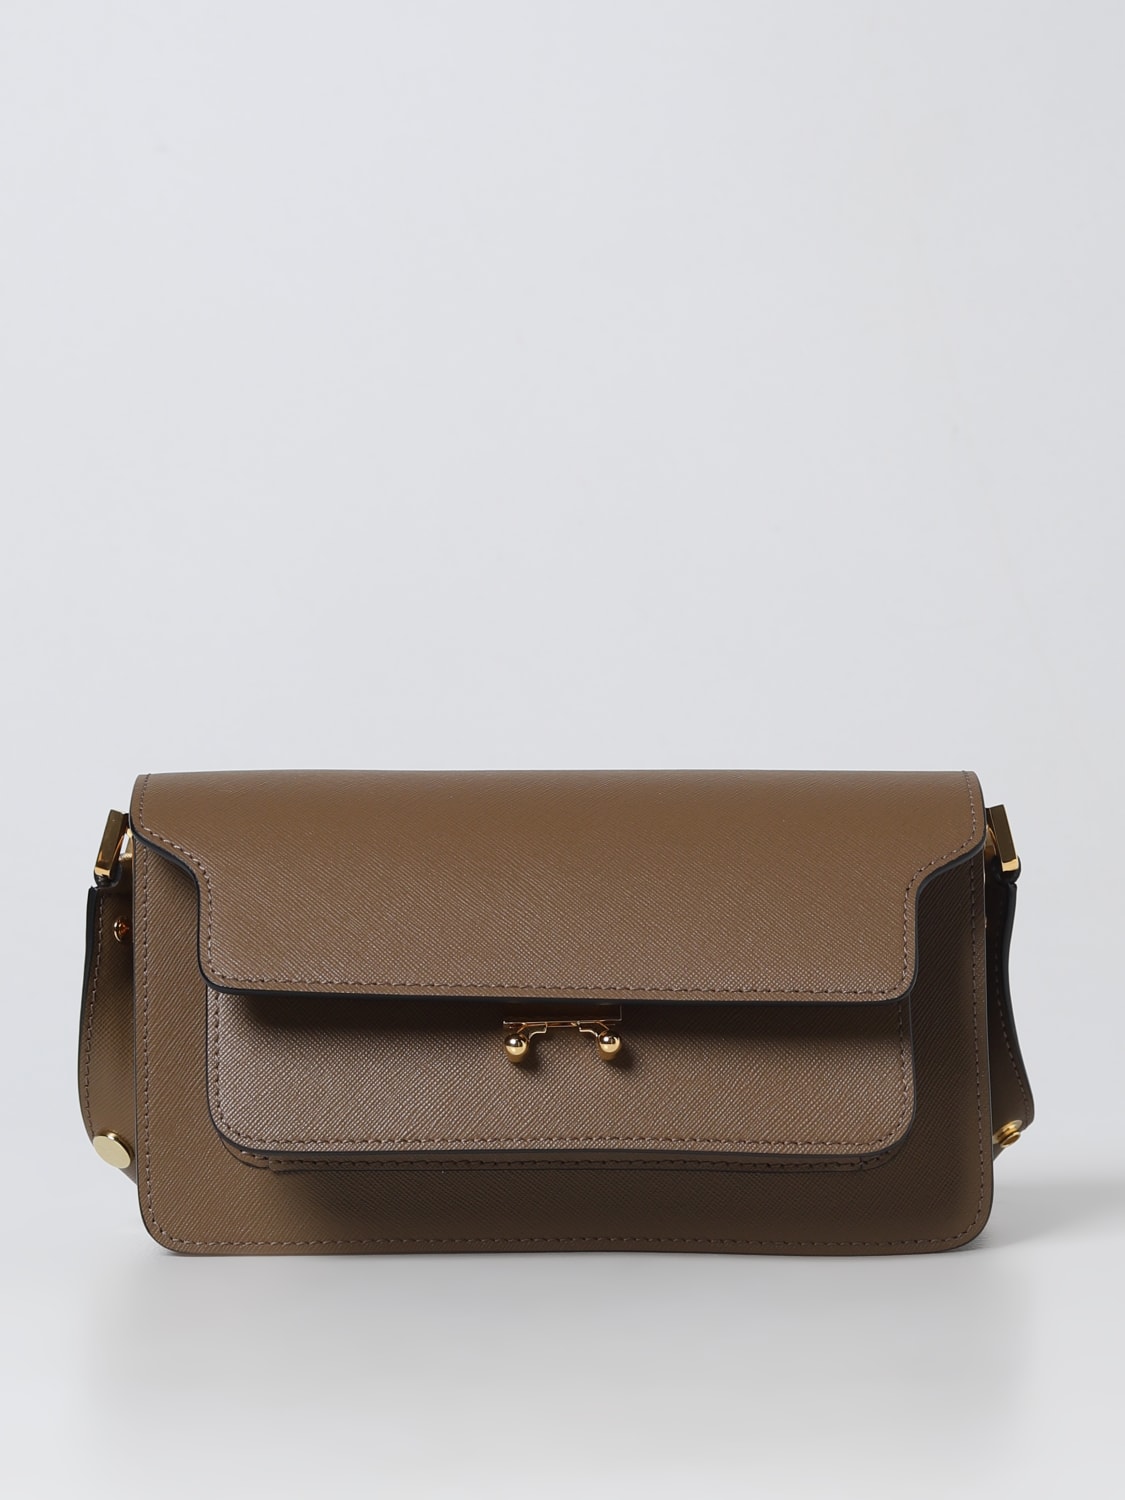 Trunk bag in saffiano leather